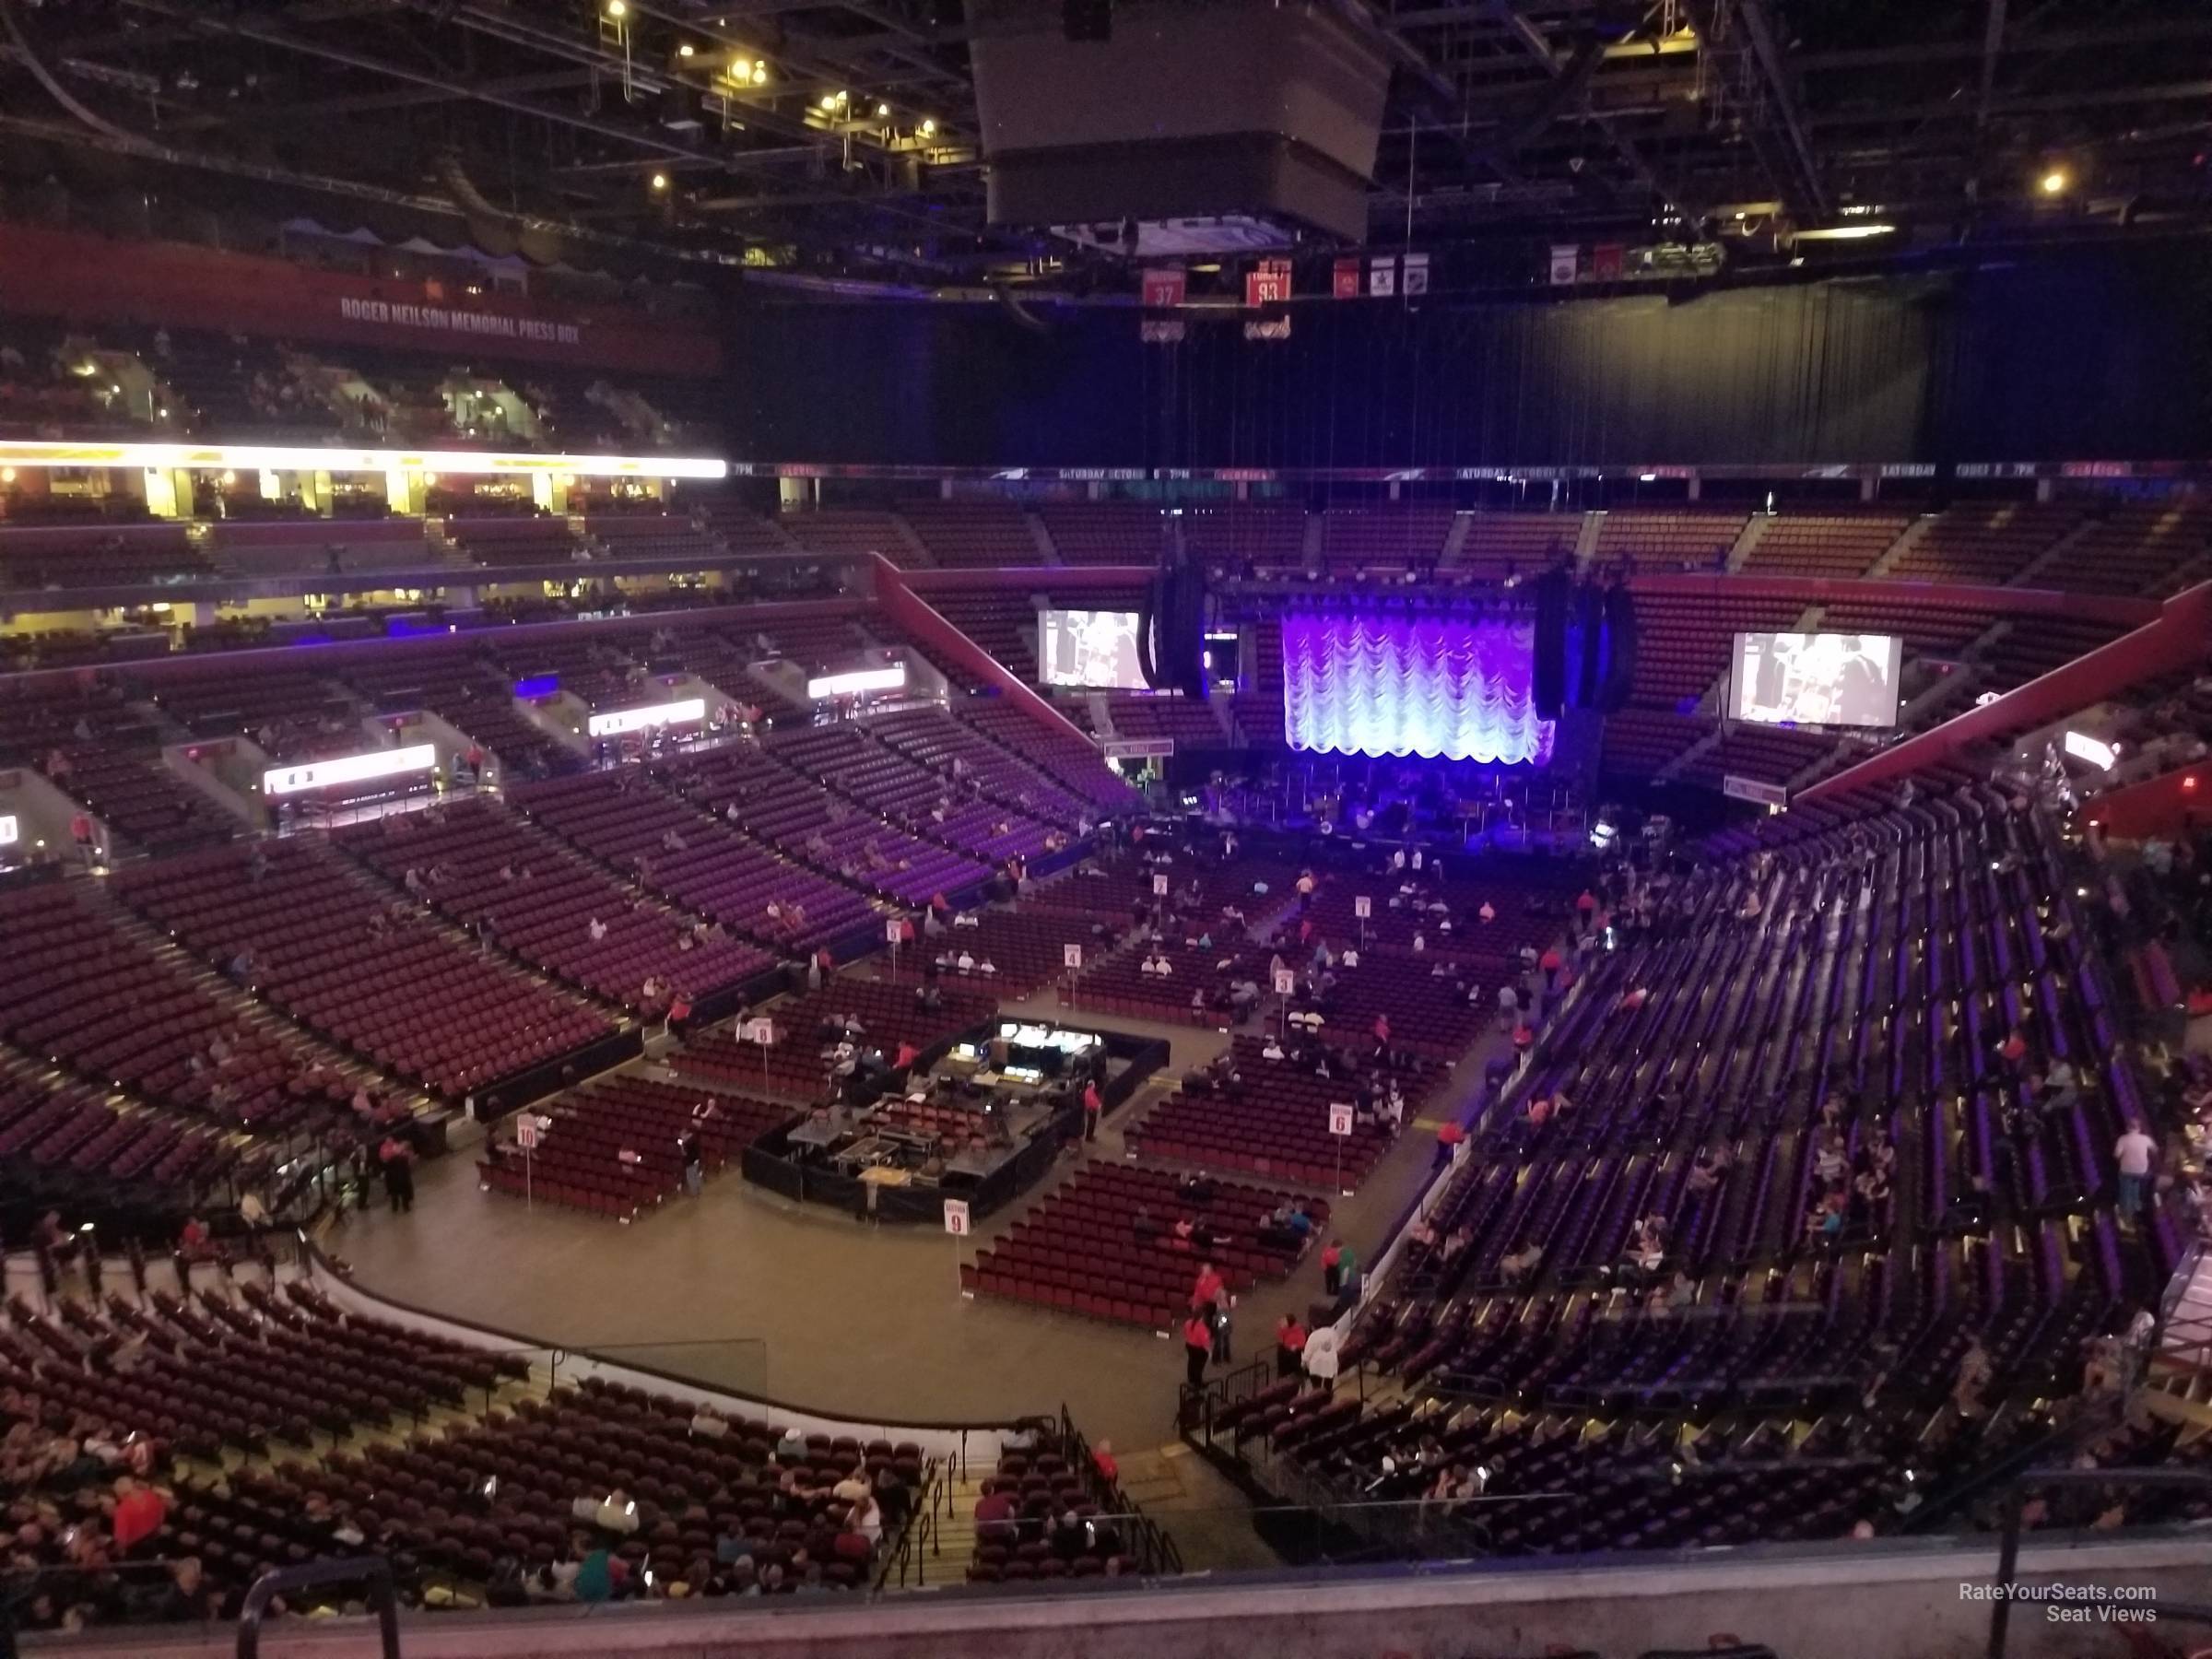 club c7, row 6 seat view  for concert - amerant bank arena